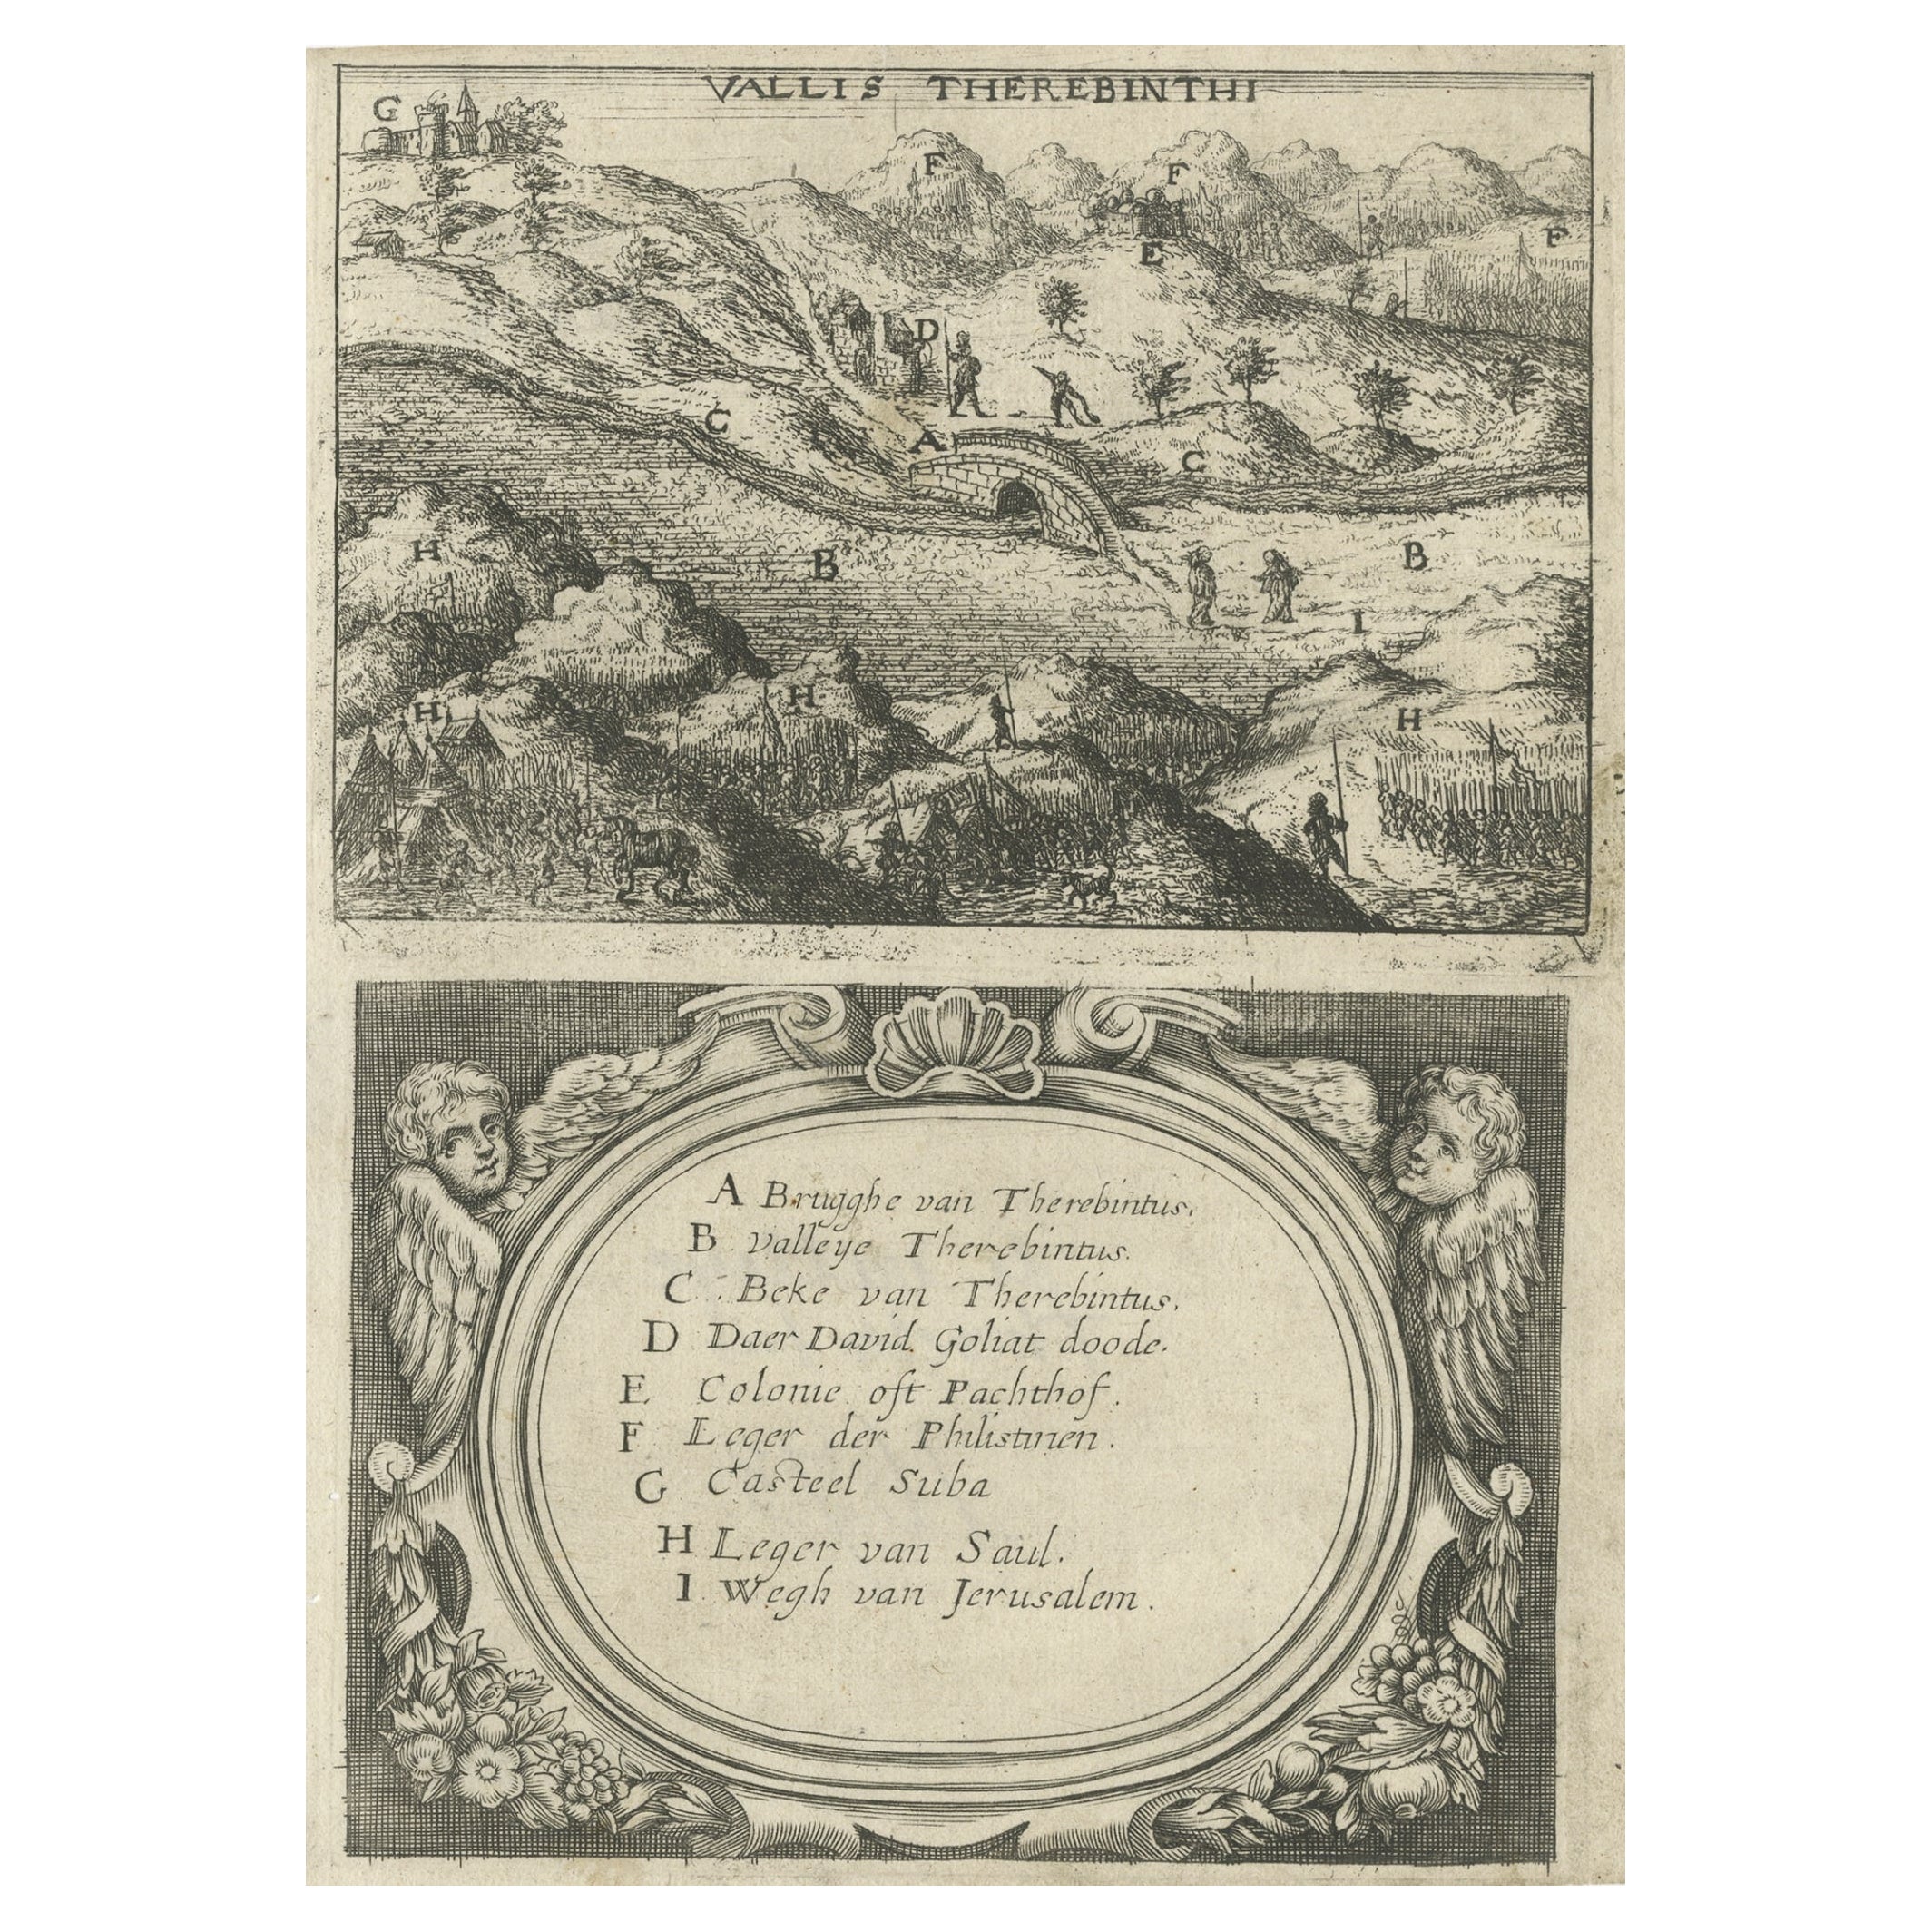 Very Rare Antique Print of the Valley of Terebinthus in Arabia, 1673 For Sale